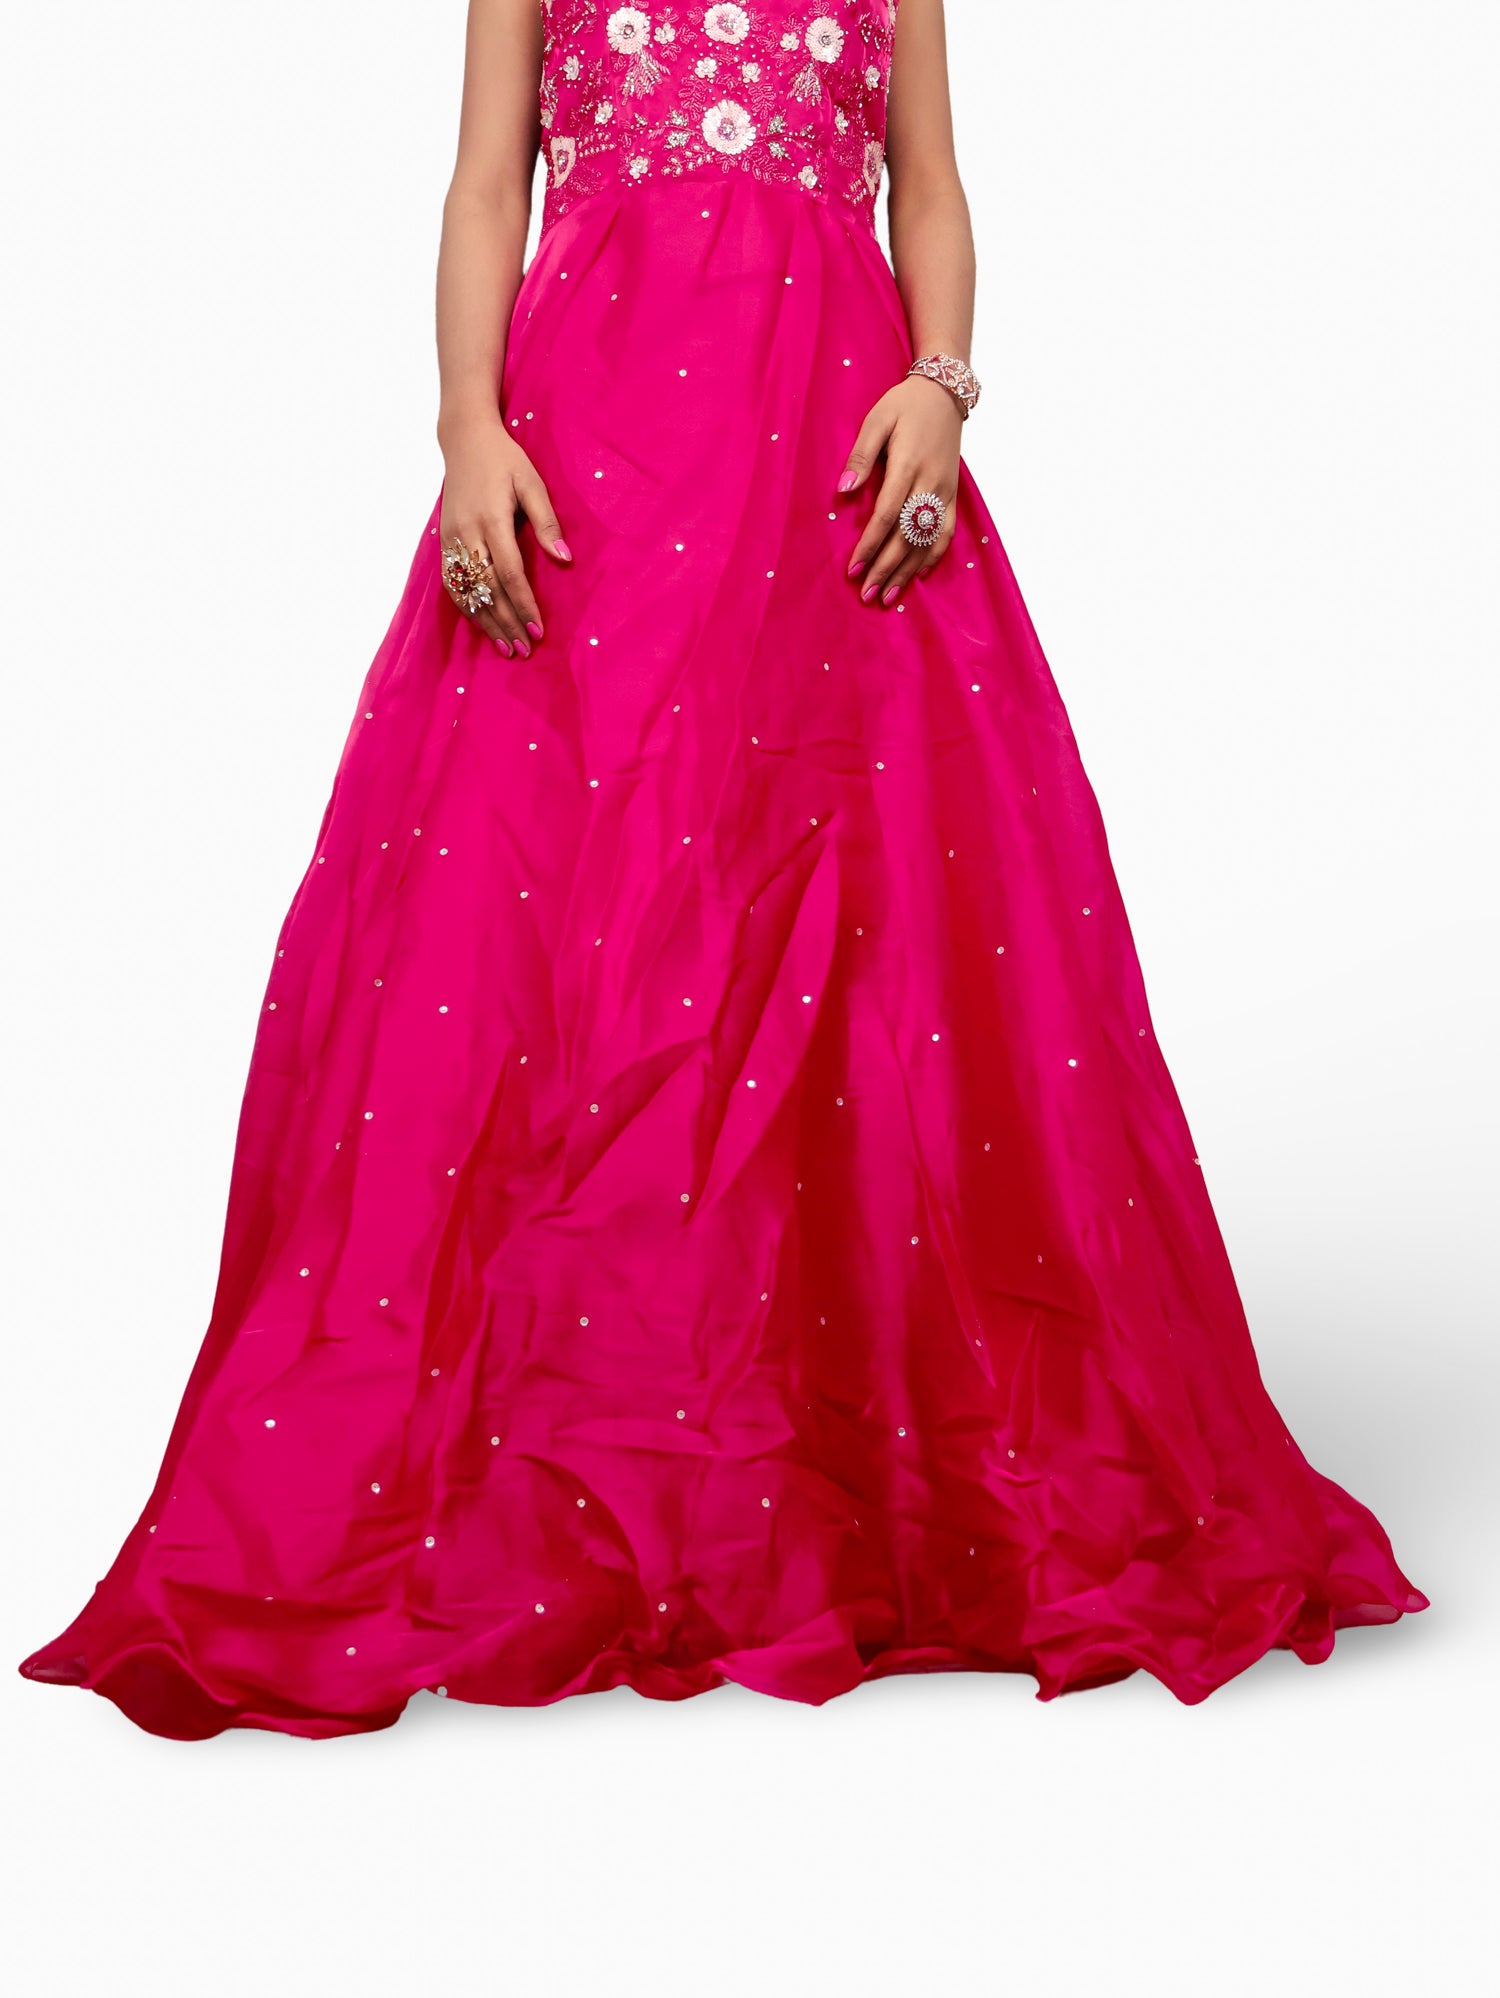 Gown with Sequin &amp; Cut Dana Work by Shreekama Magenta Designer Gowns for Party Festival Wedding Occasion in Noida